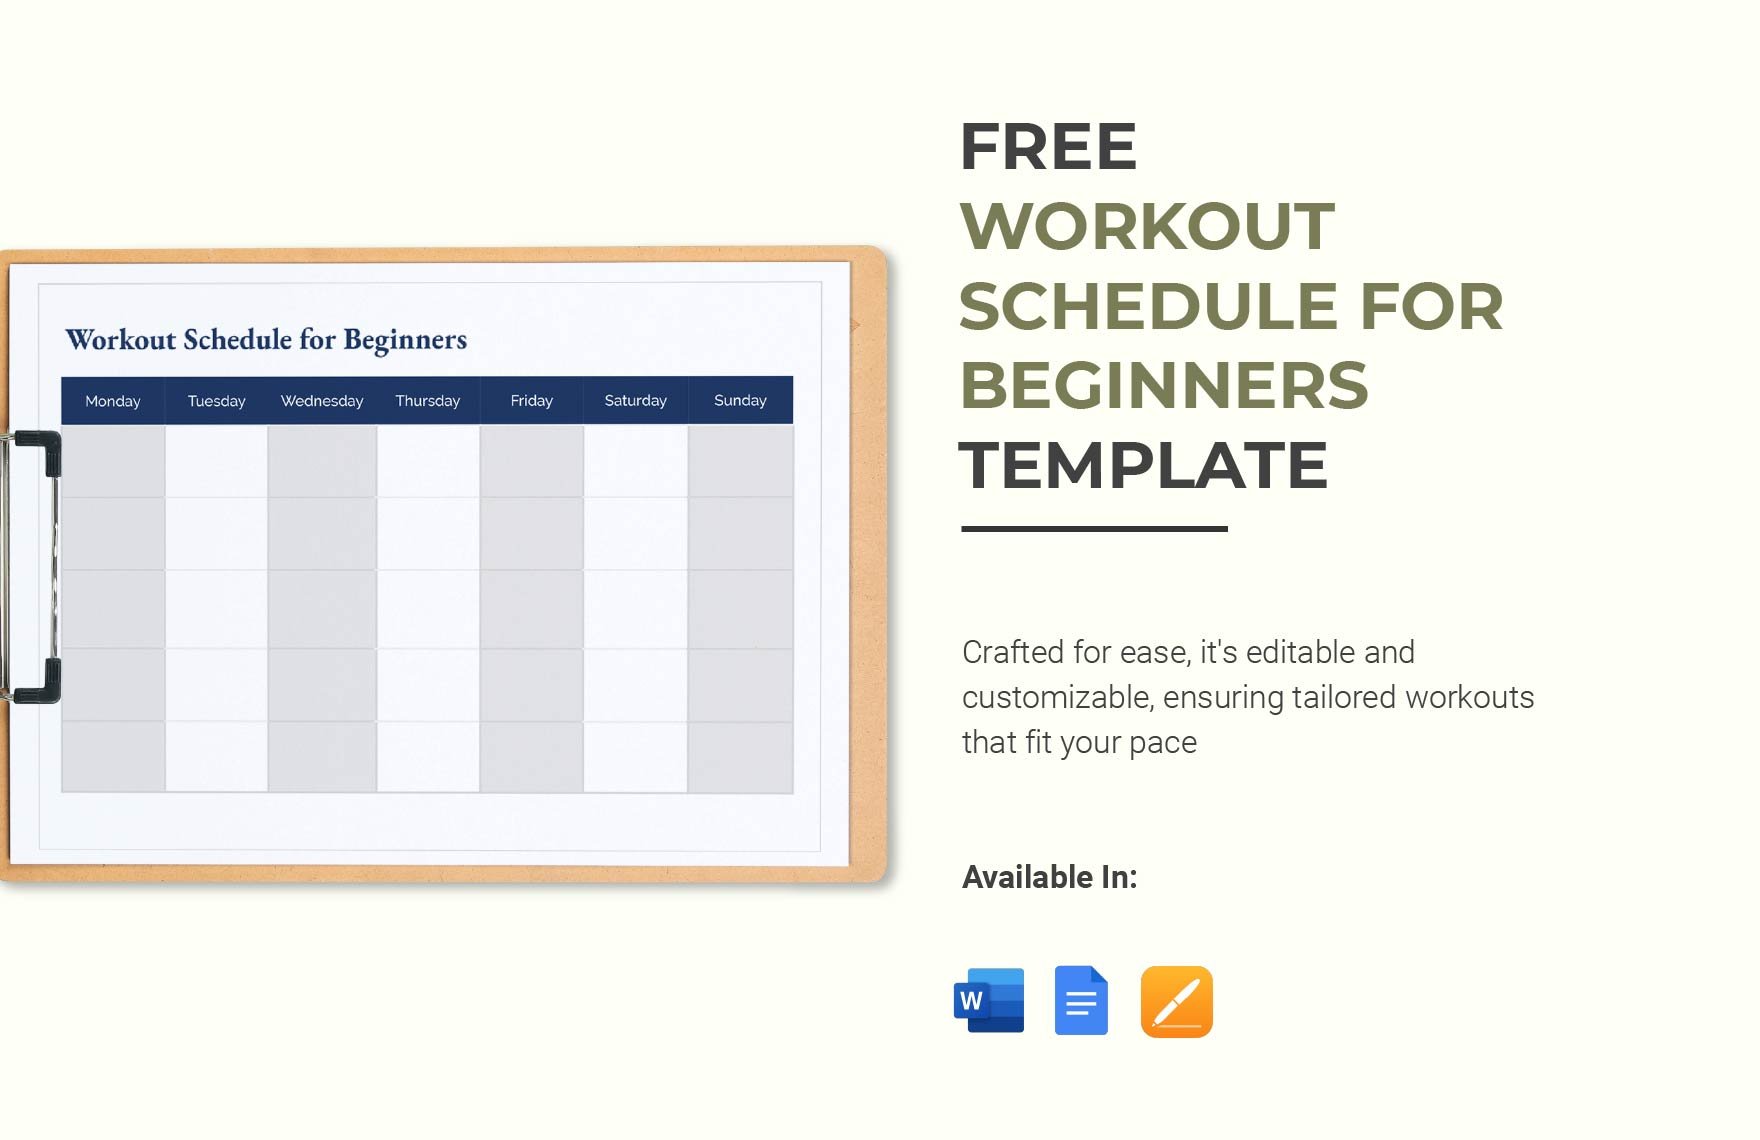 Workout Schedule for Beginners Template